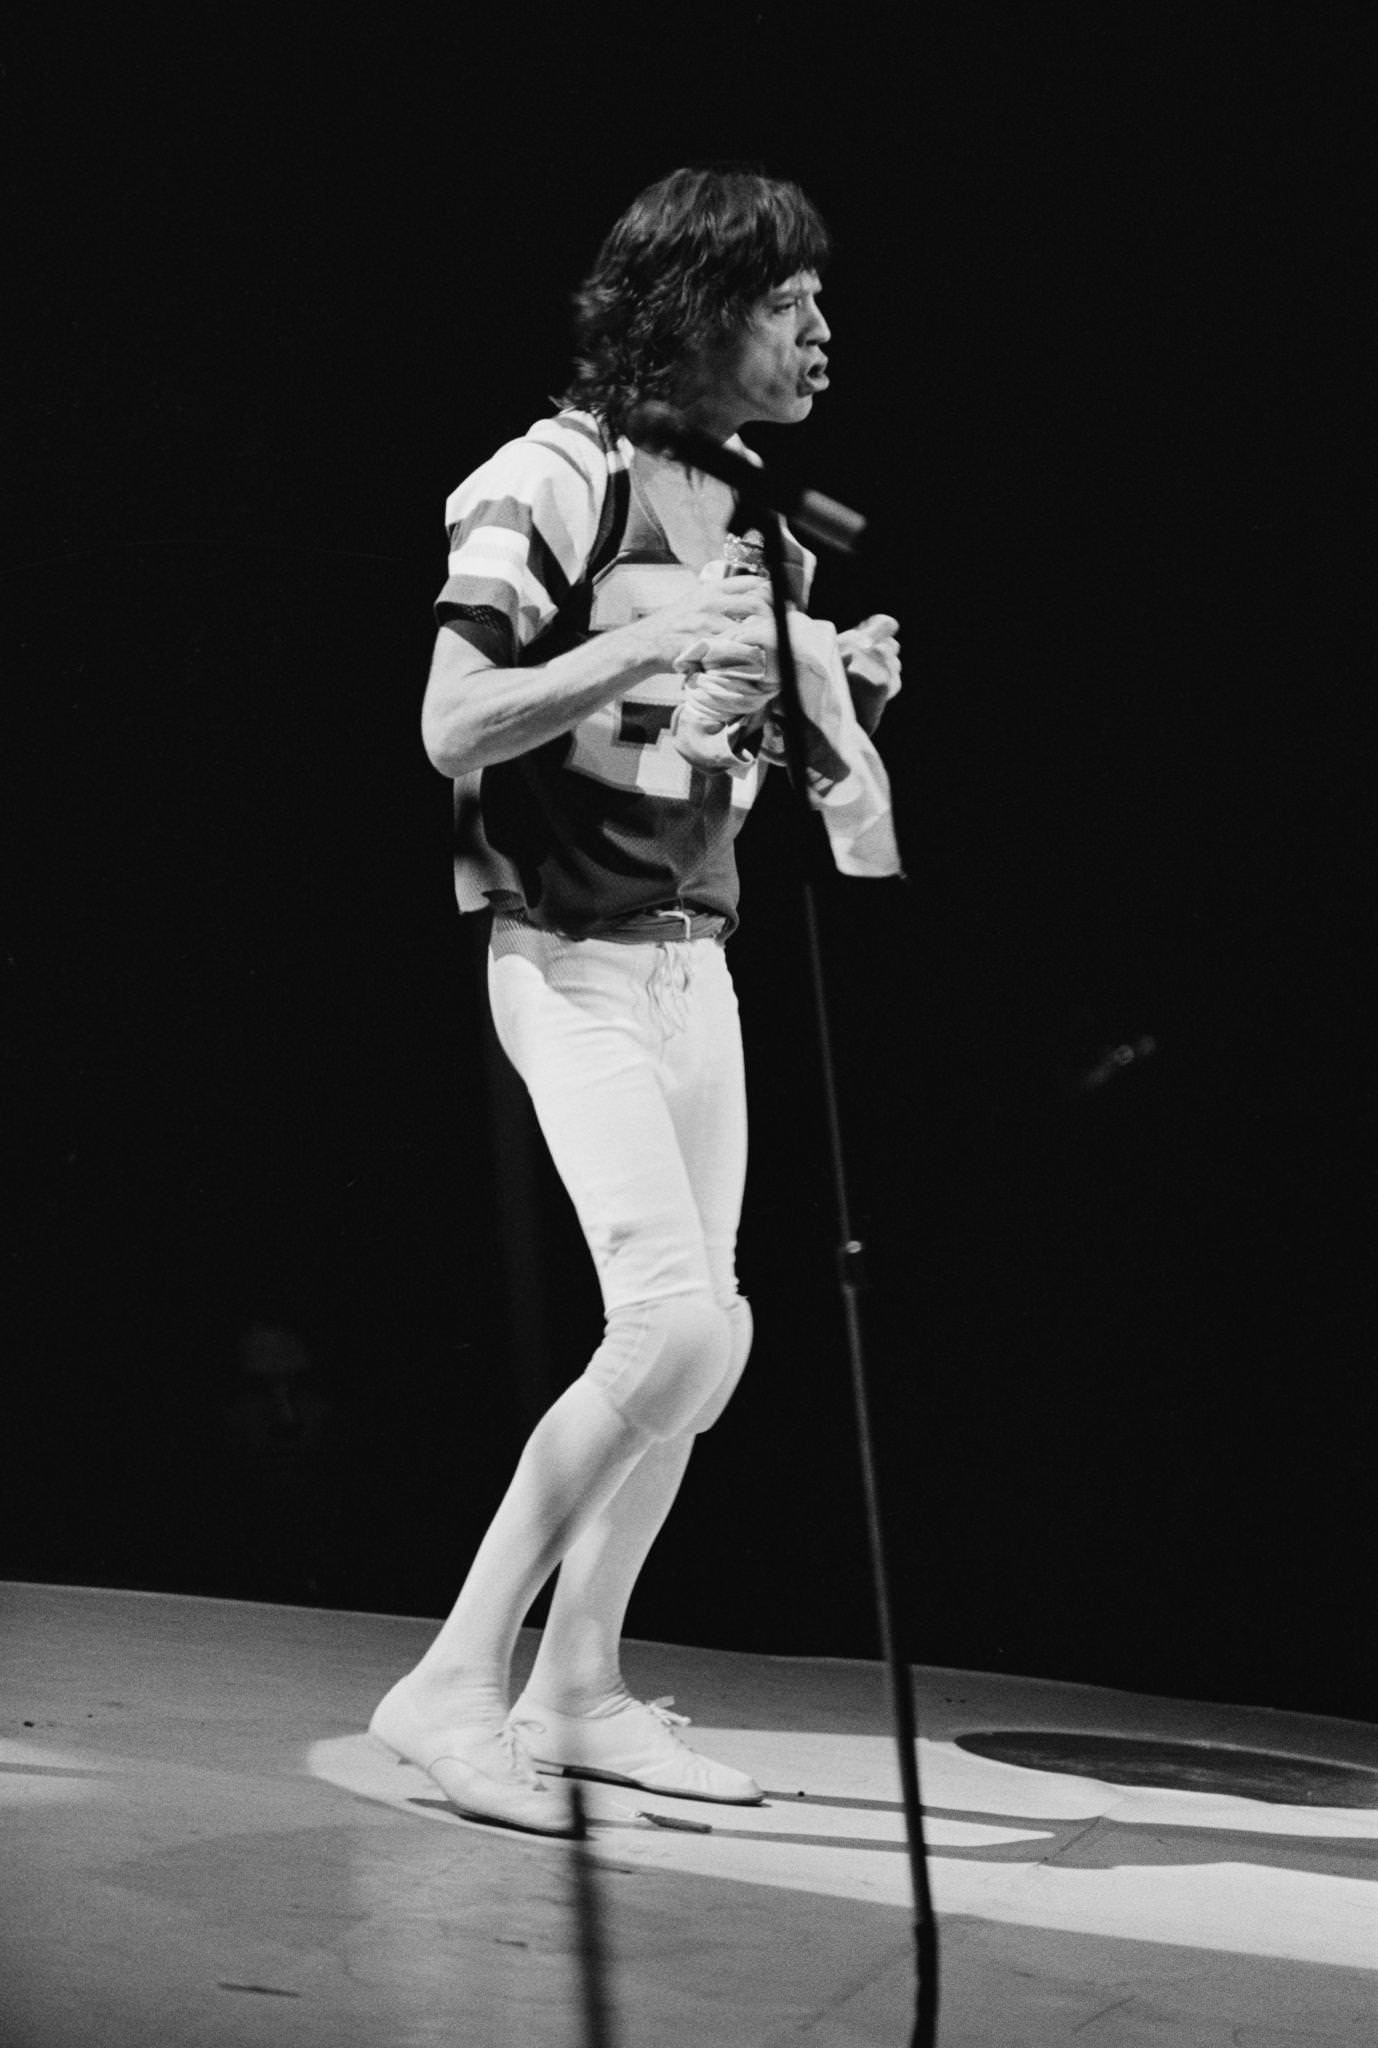 Mick Jagger, wearing an American football shirt, performs with The Rolling Stones , 1975.